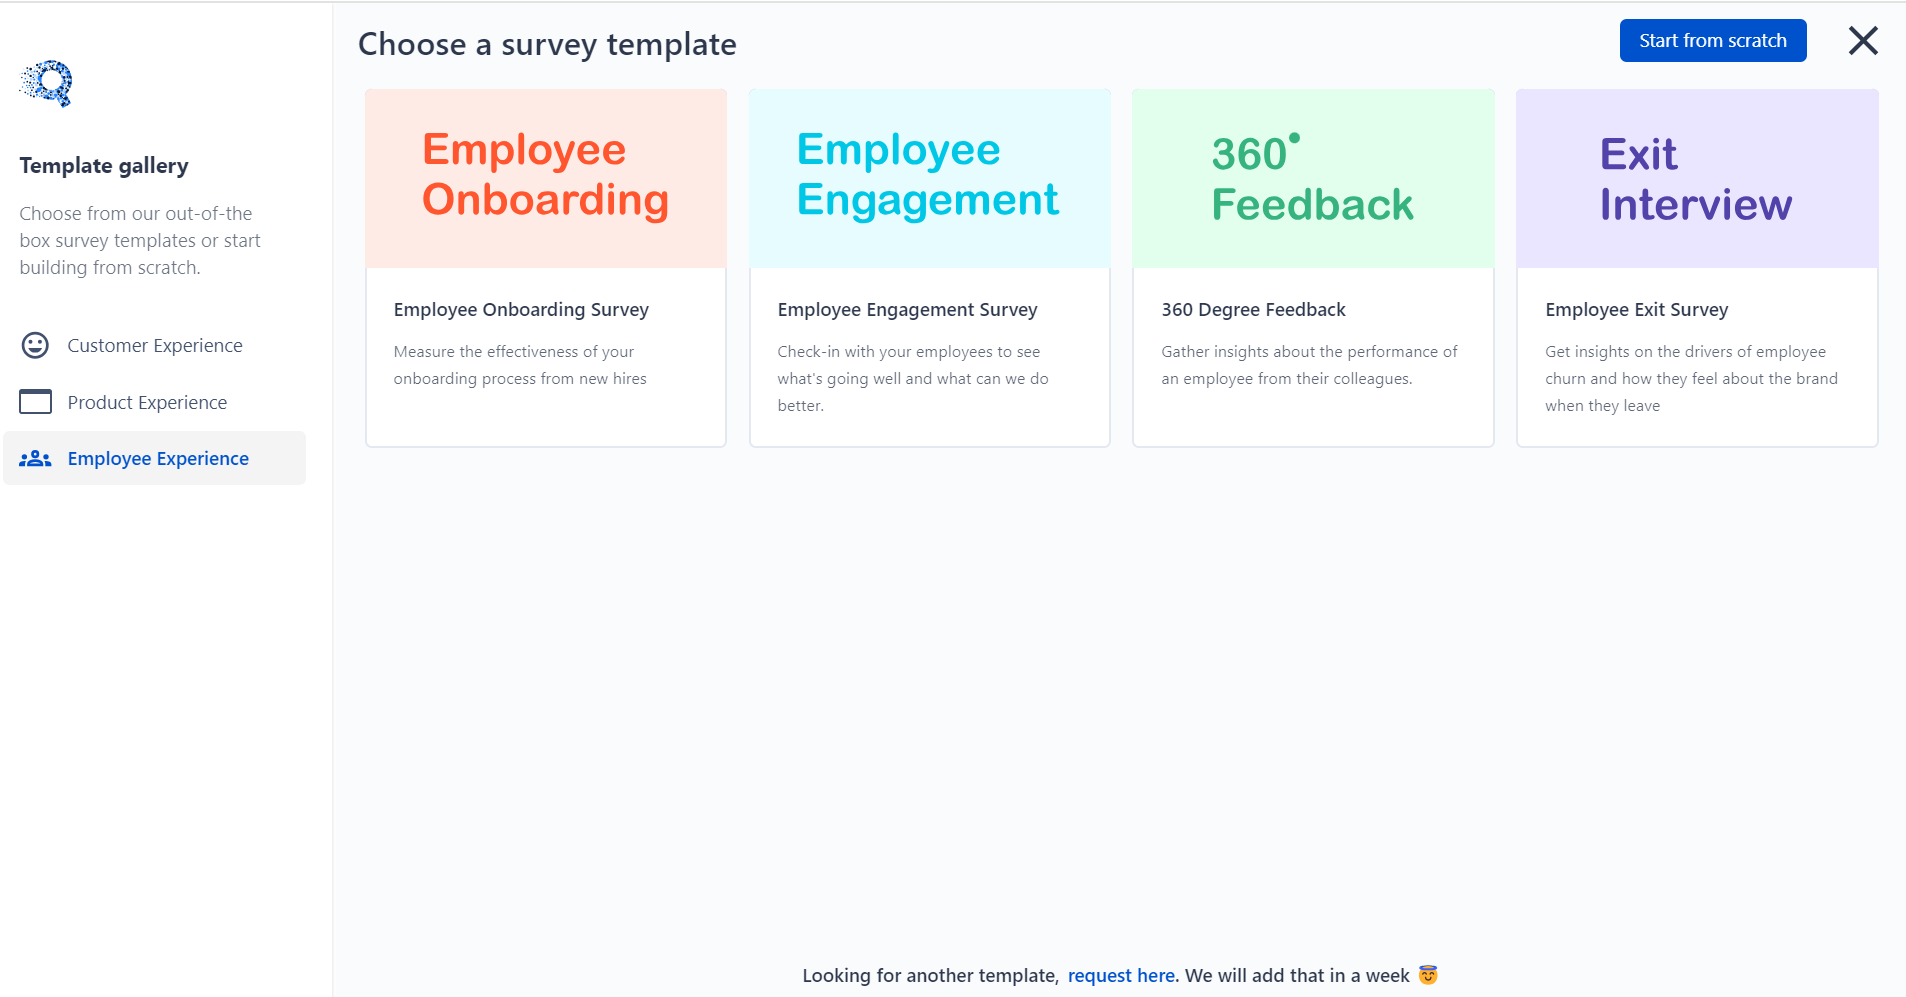  This is the image of the different survey templates of employee experience like employee onboarding, pulse surveys, employee satisfaction, and 360° feedback surveys. 